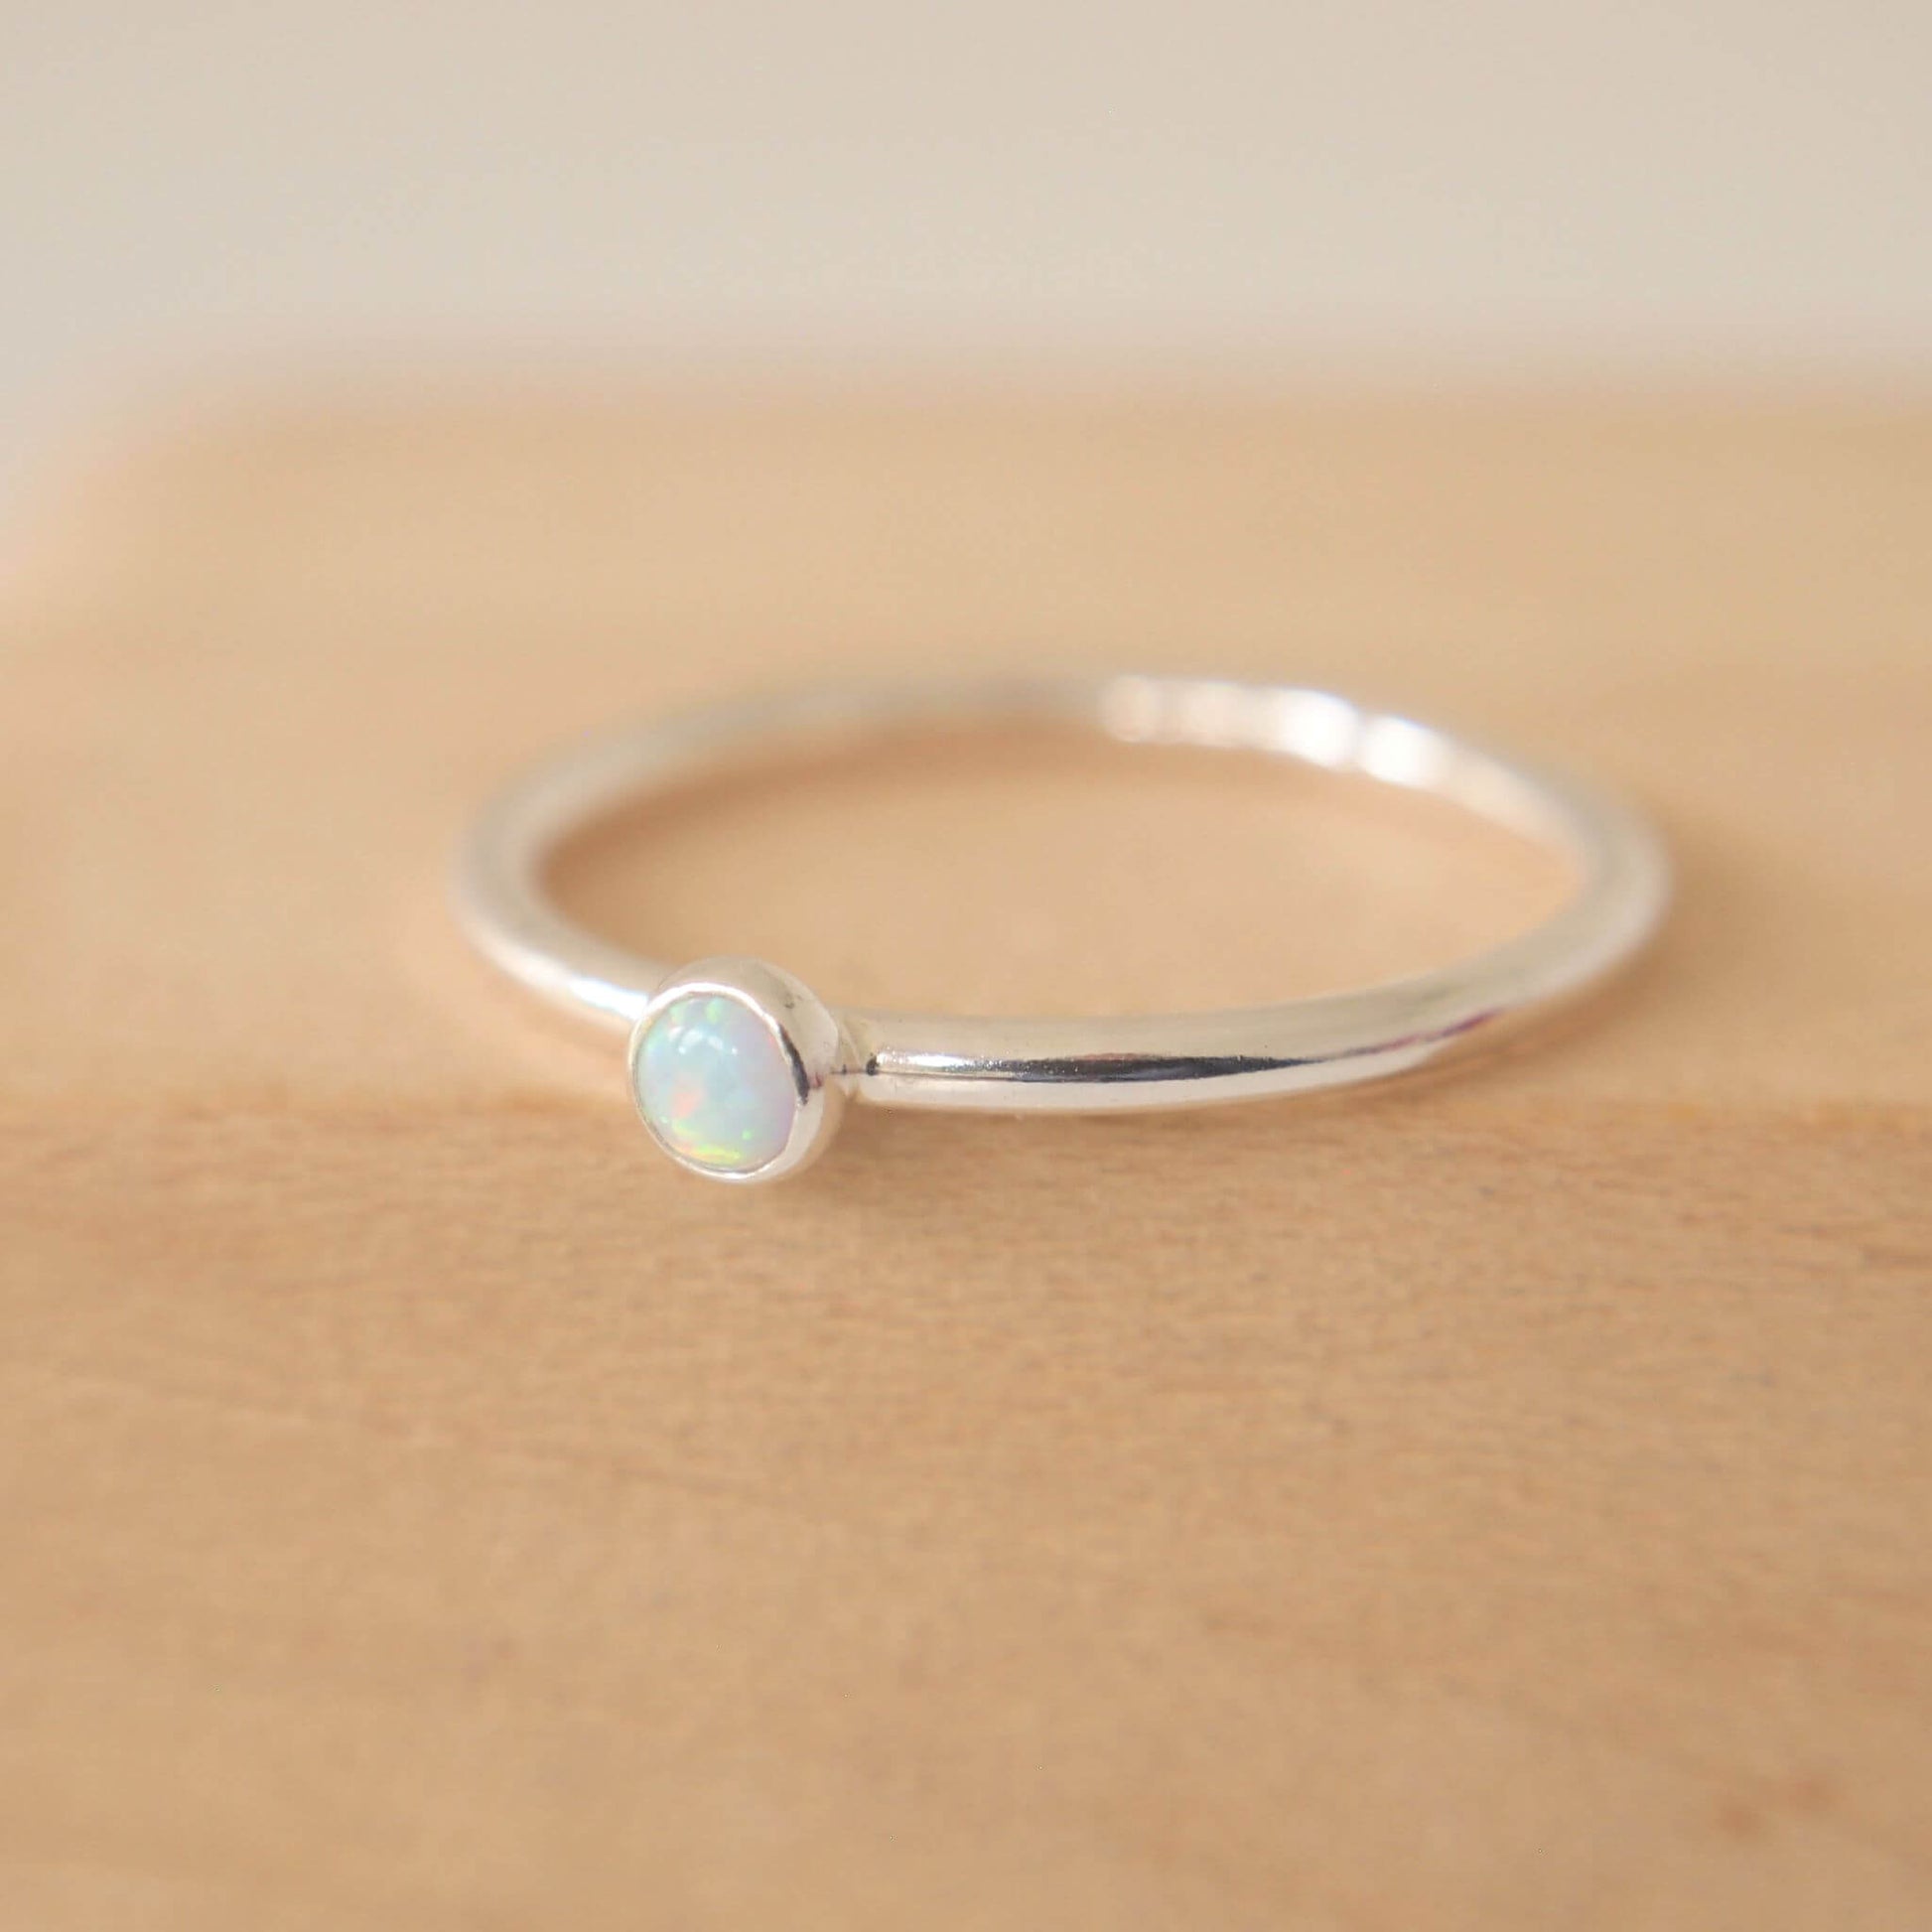 Lab Opal birthstone stacking ring with small gemstone. Hand made in Scotland by maram jewellery